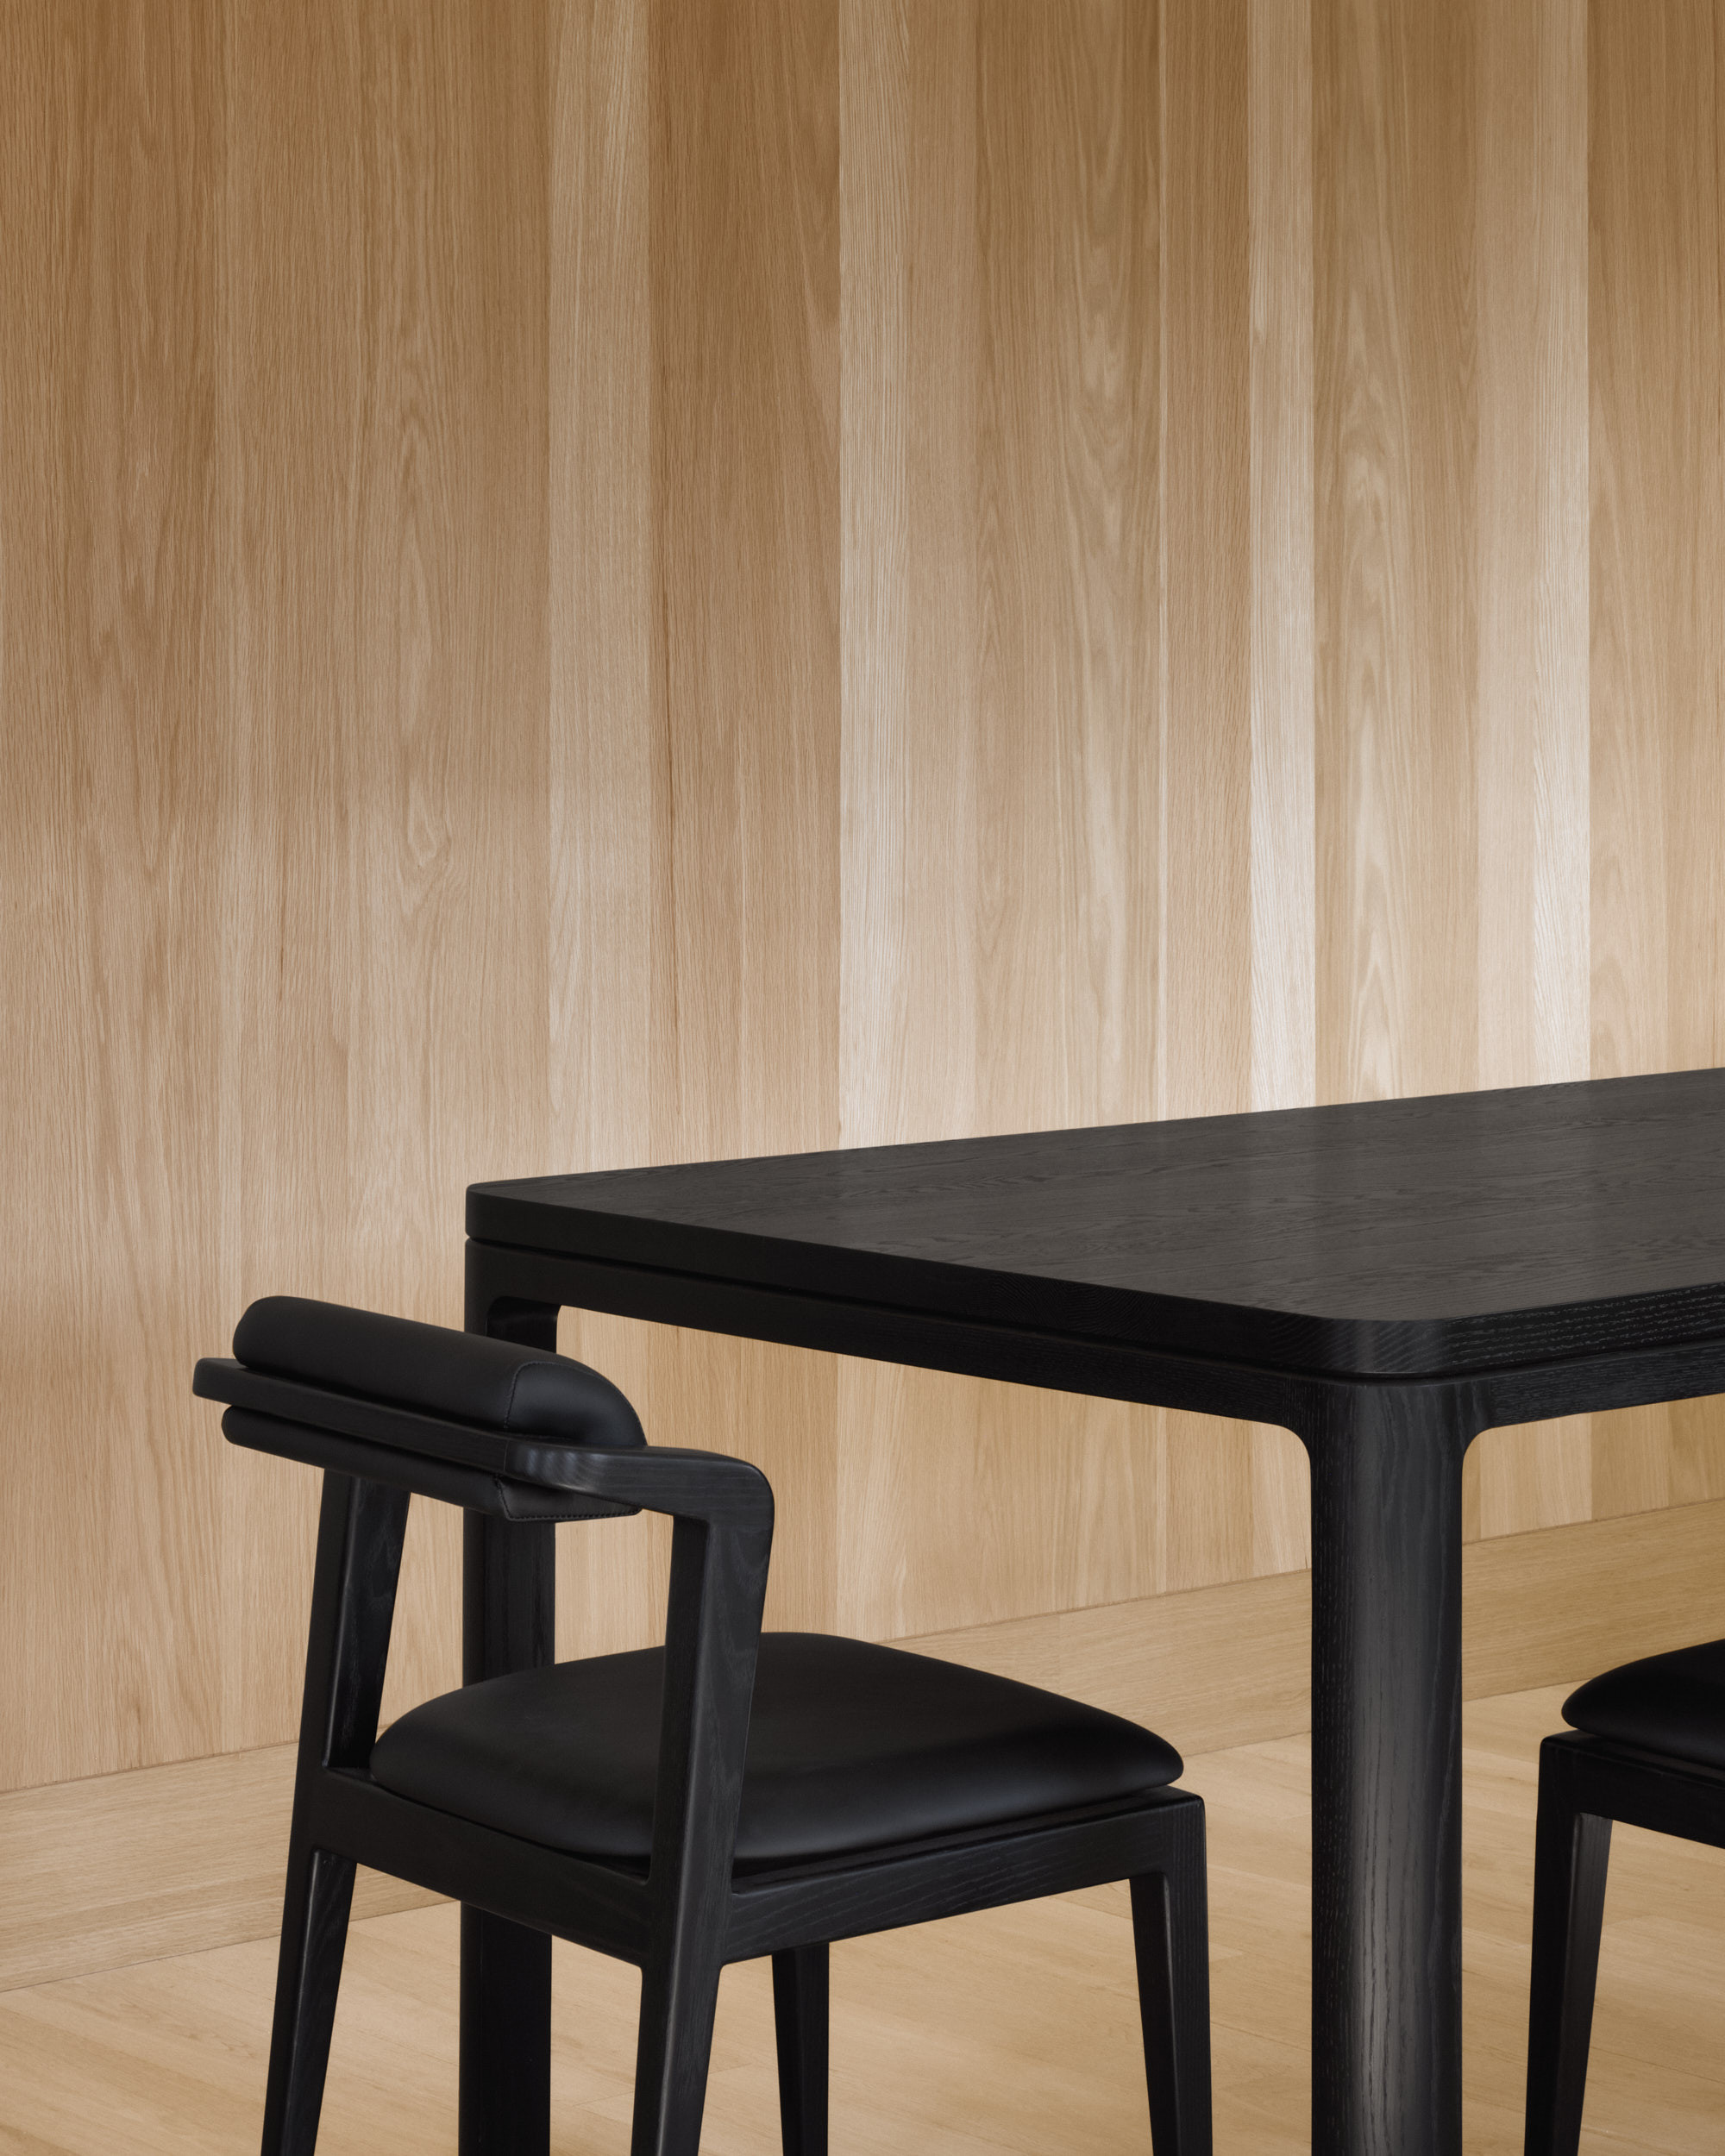 A detail view of the Nord table and chairs in all black